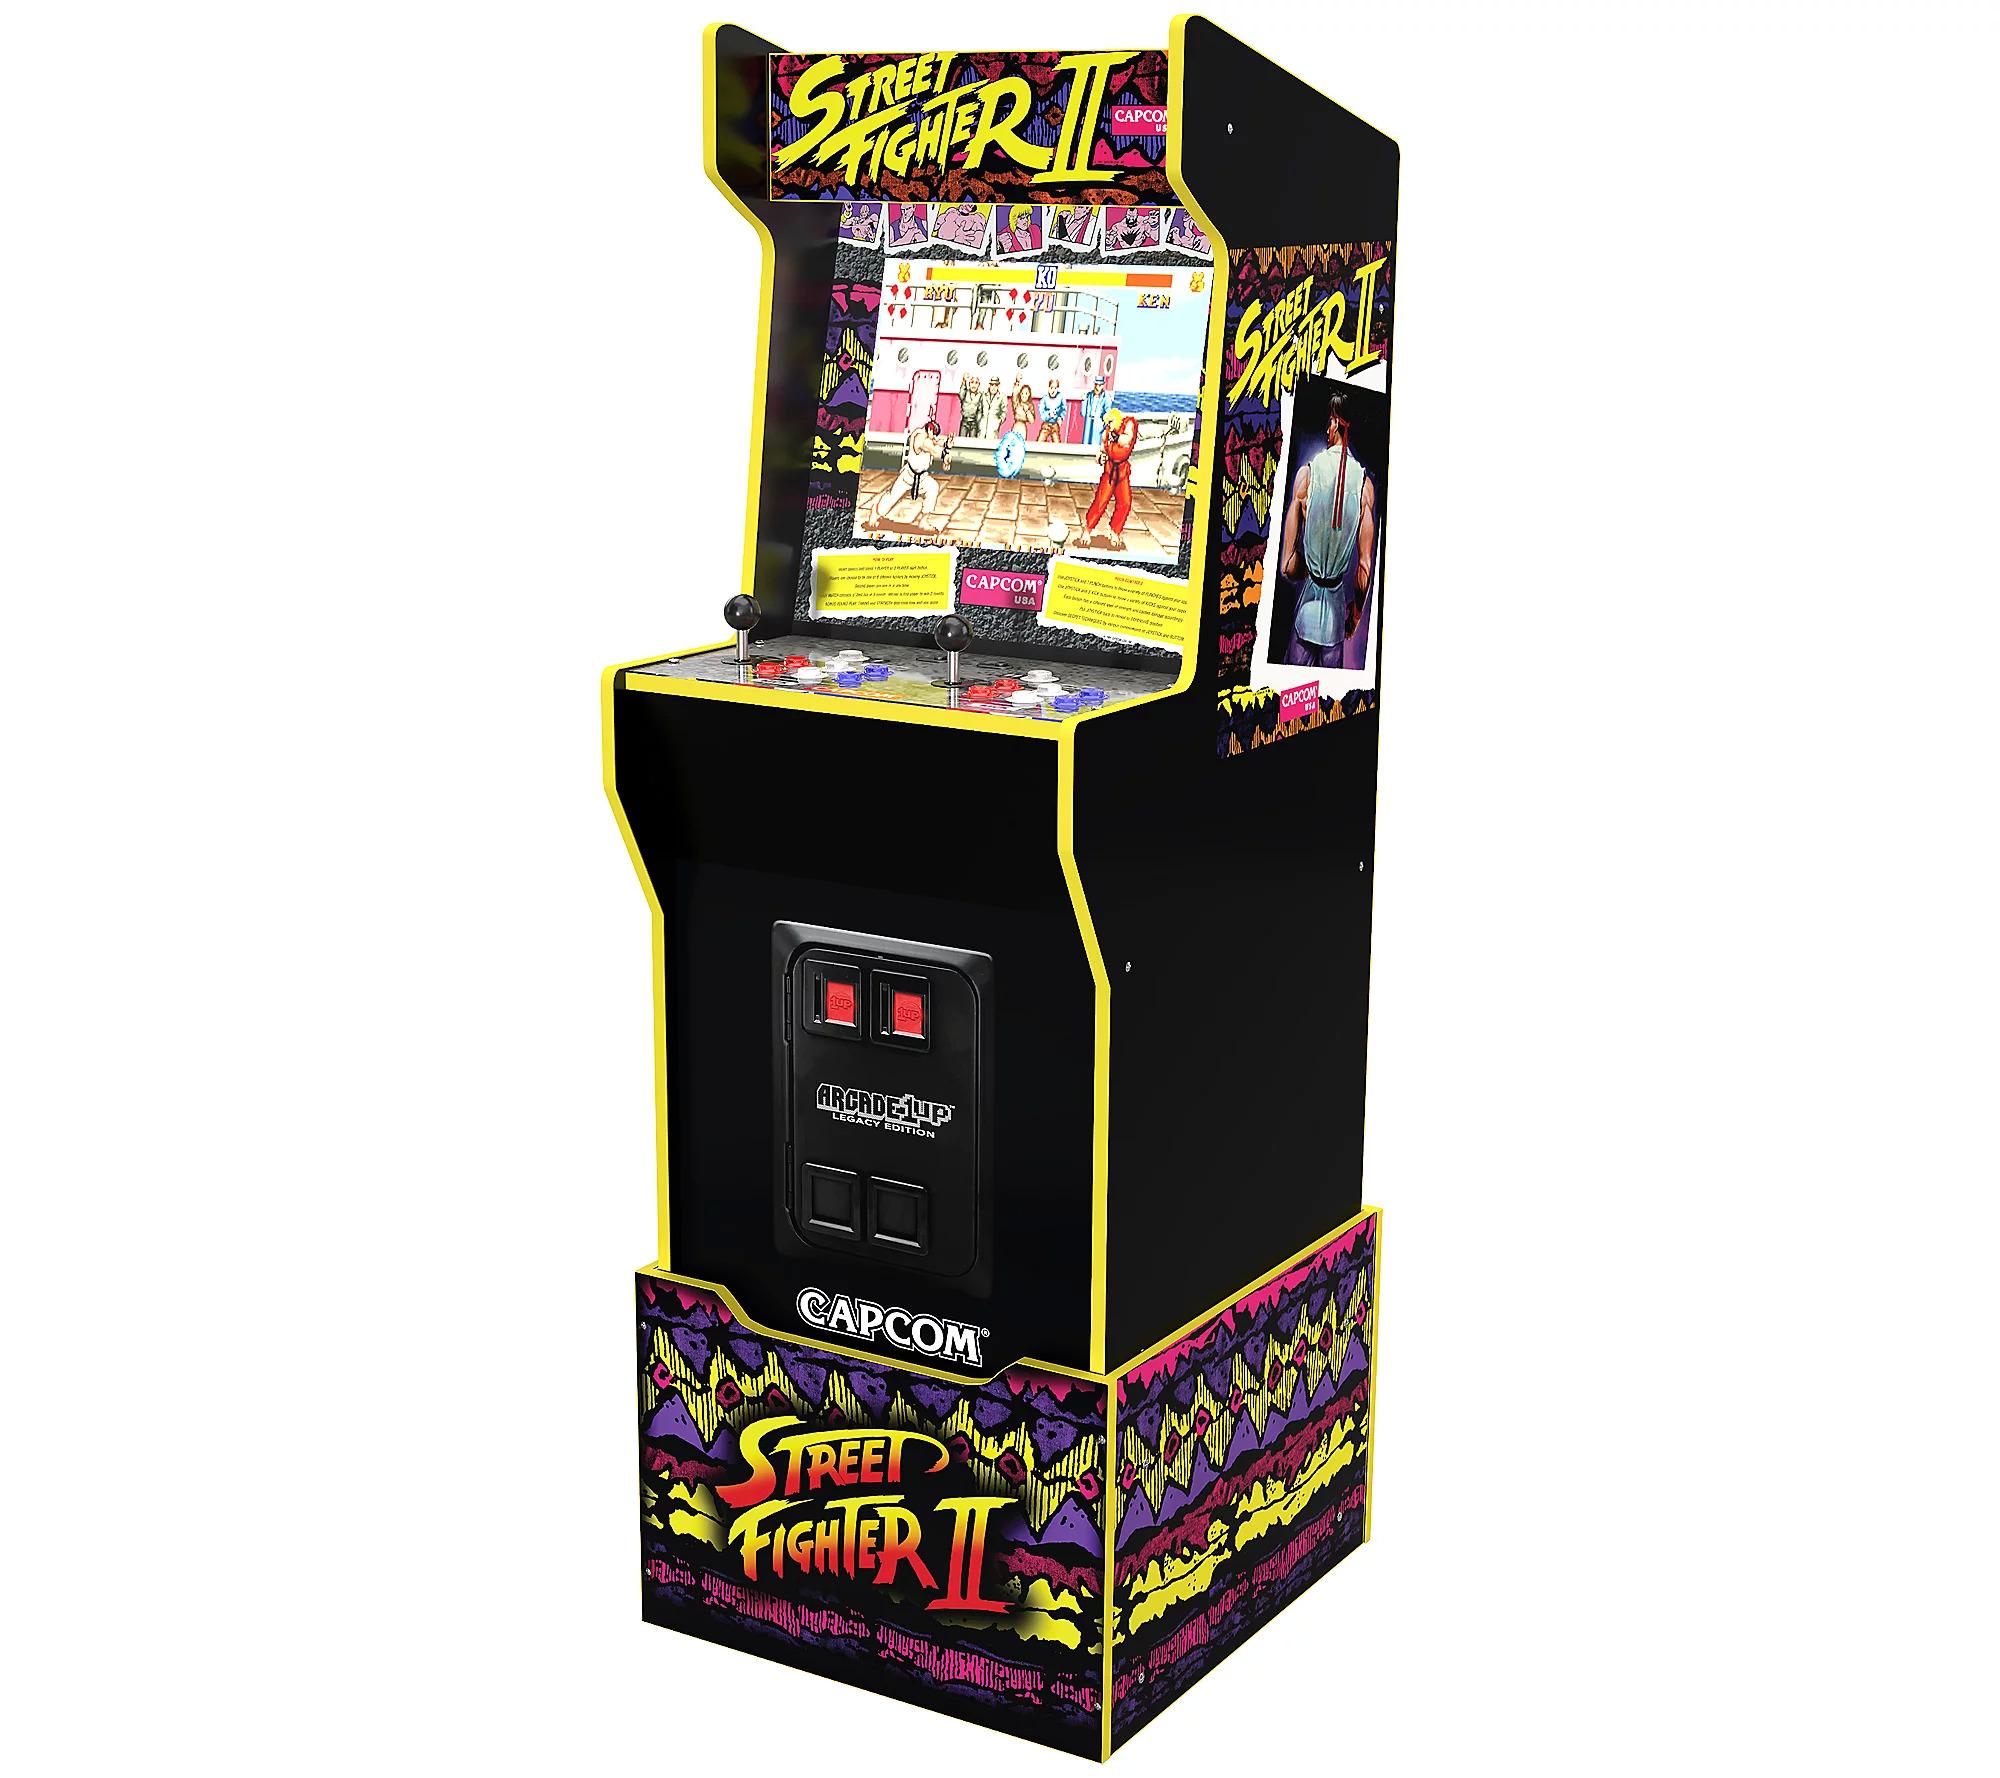 Arcade1Up 12-in-1 Full Size Deluxe Arcade Machine for $334.97 Shipped